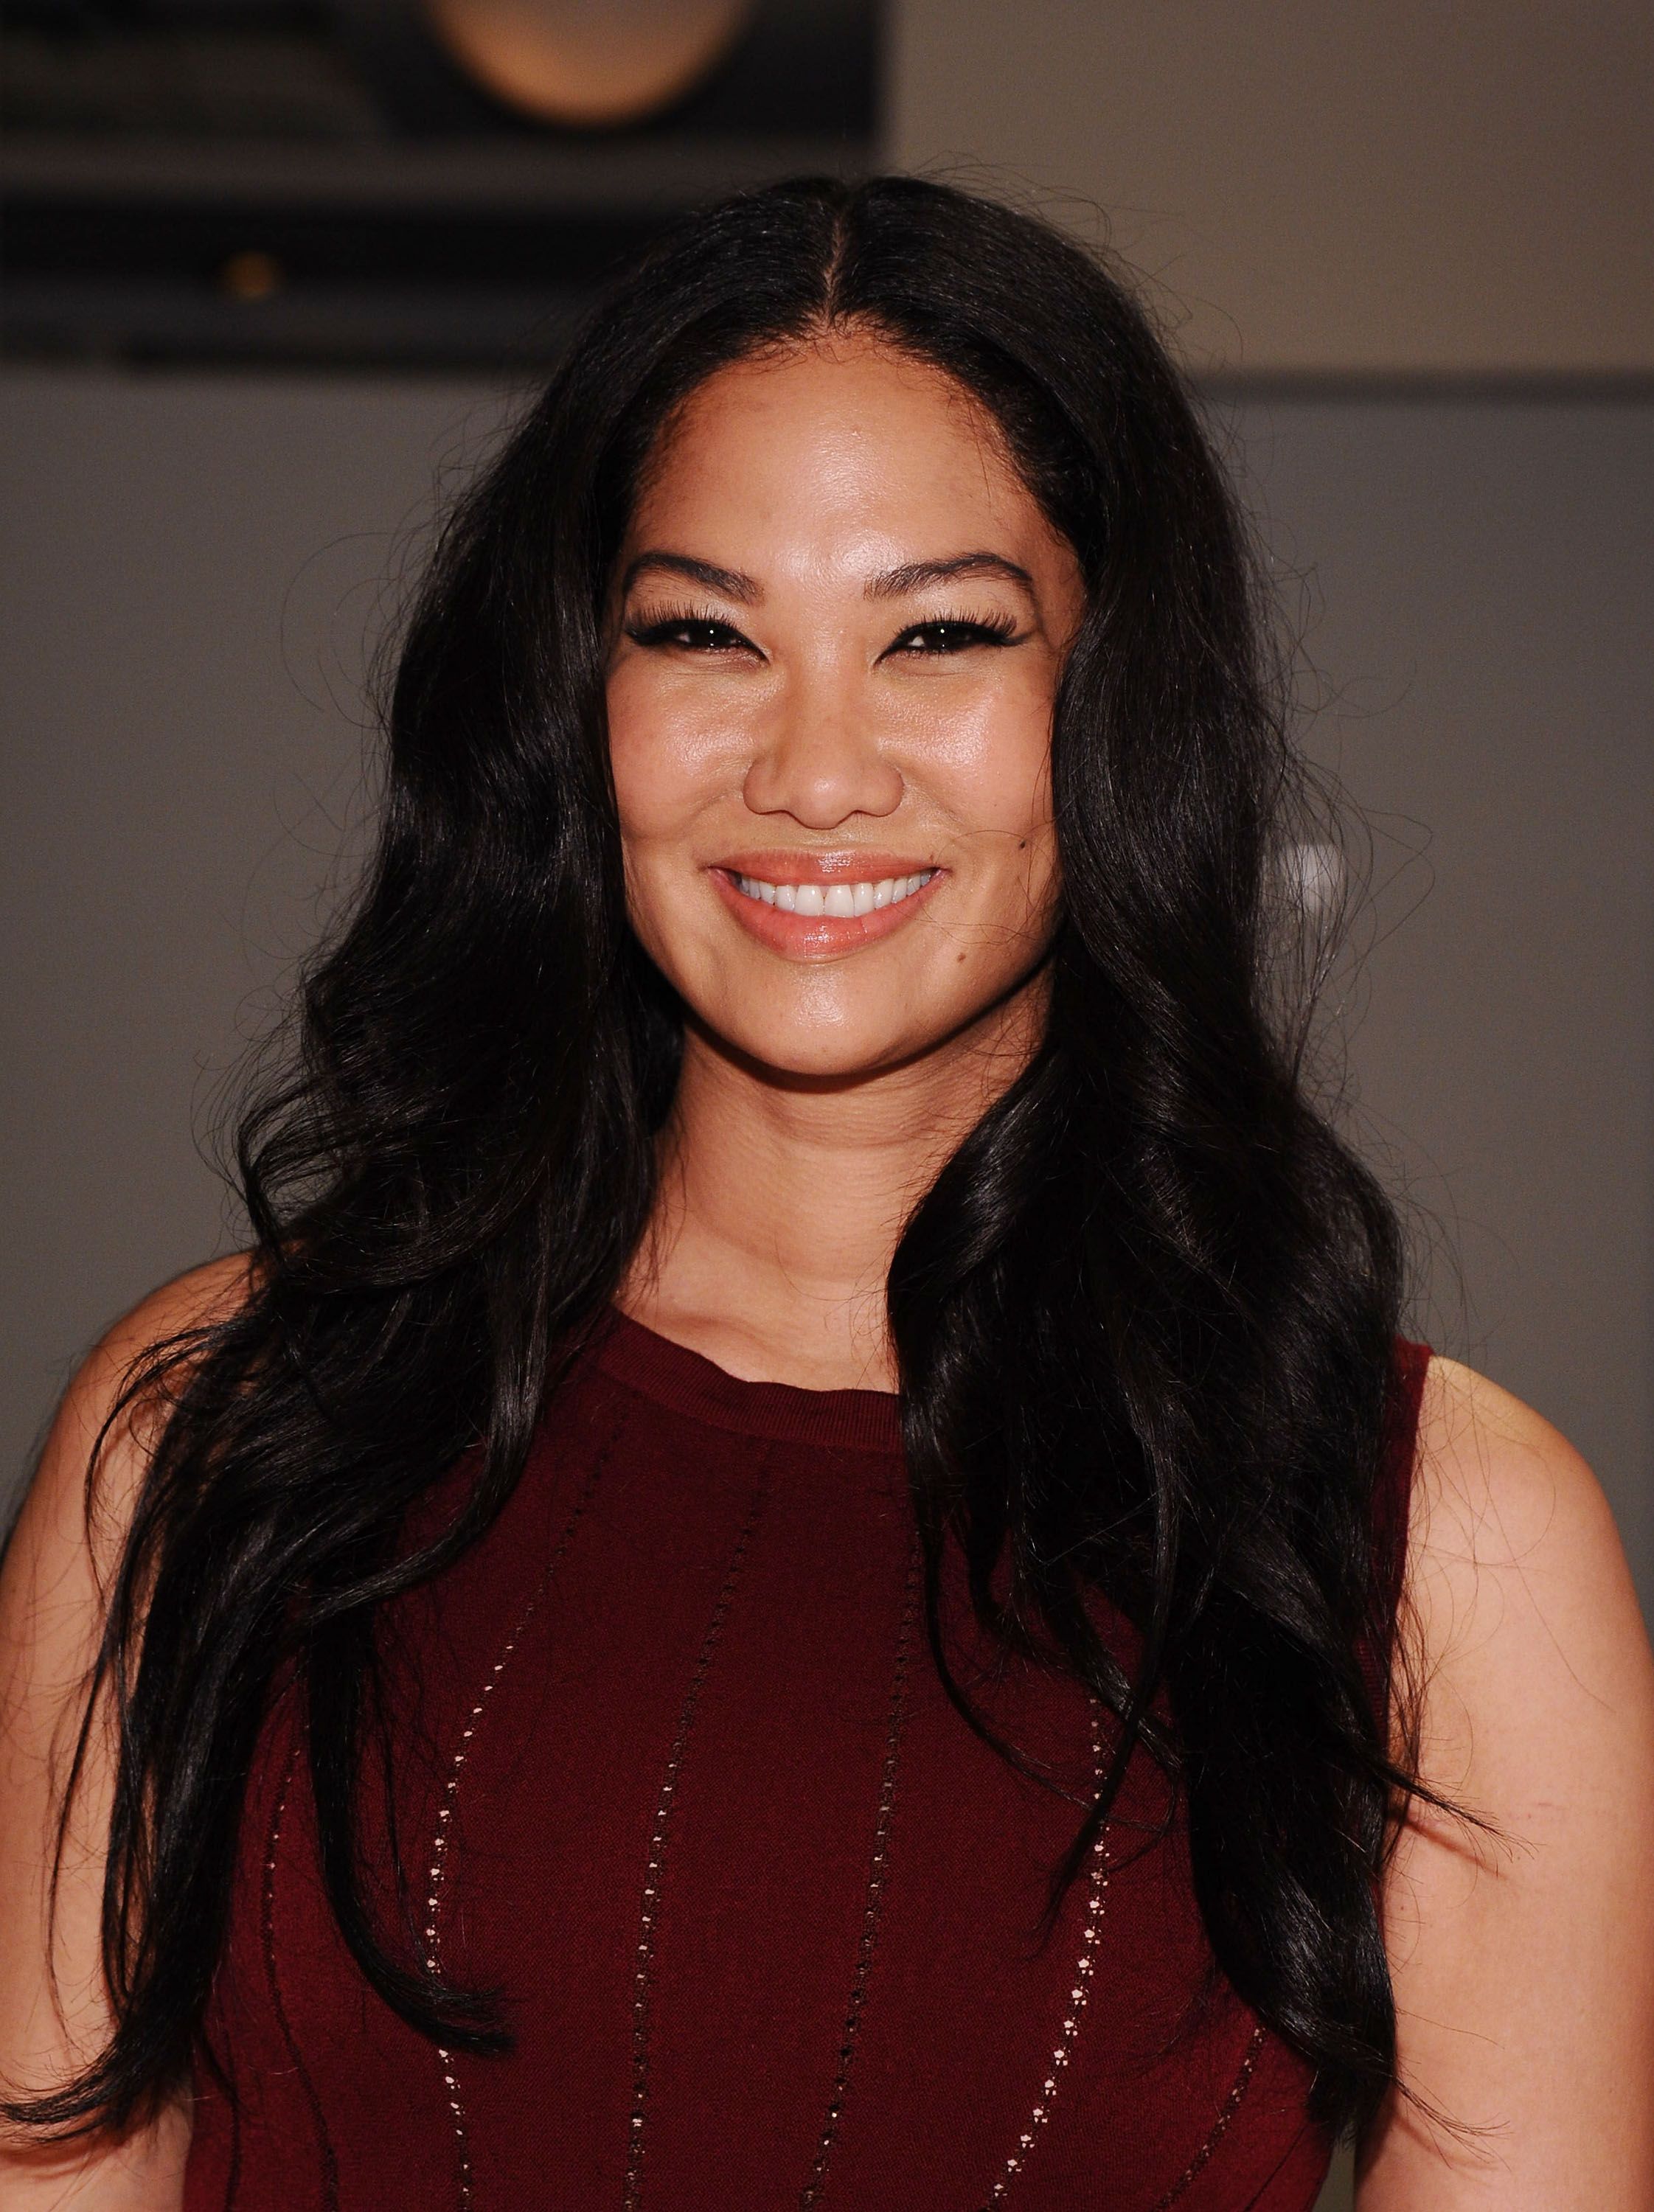 Kimora Lee Simmons at the Argyleculture by Russell Simmons fashion show during Mercedes-Benz Fashion Week Spring 2015 on September 5, 2014 in New York City. | Photo: Getty Images